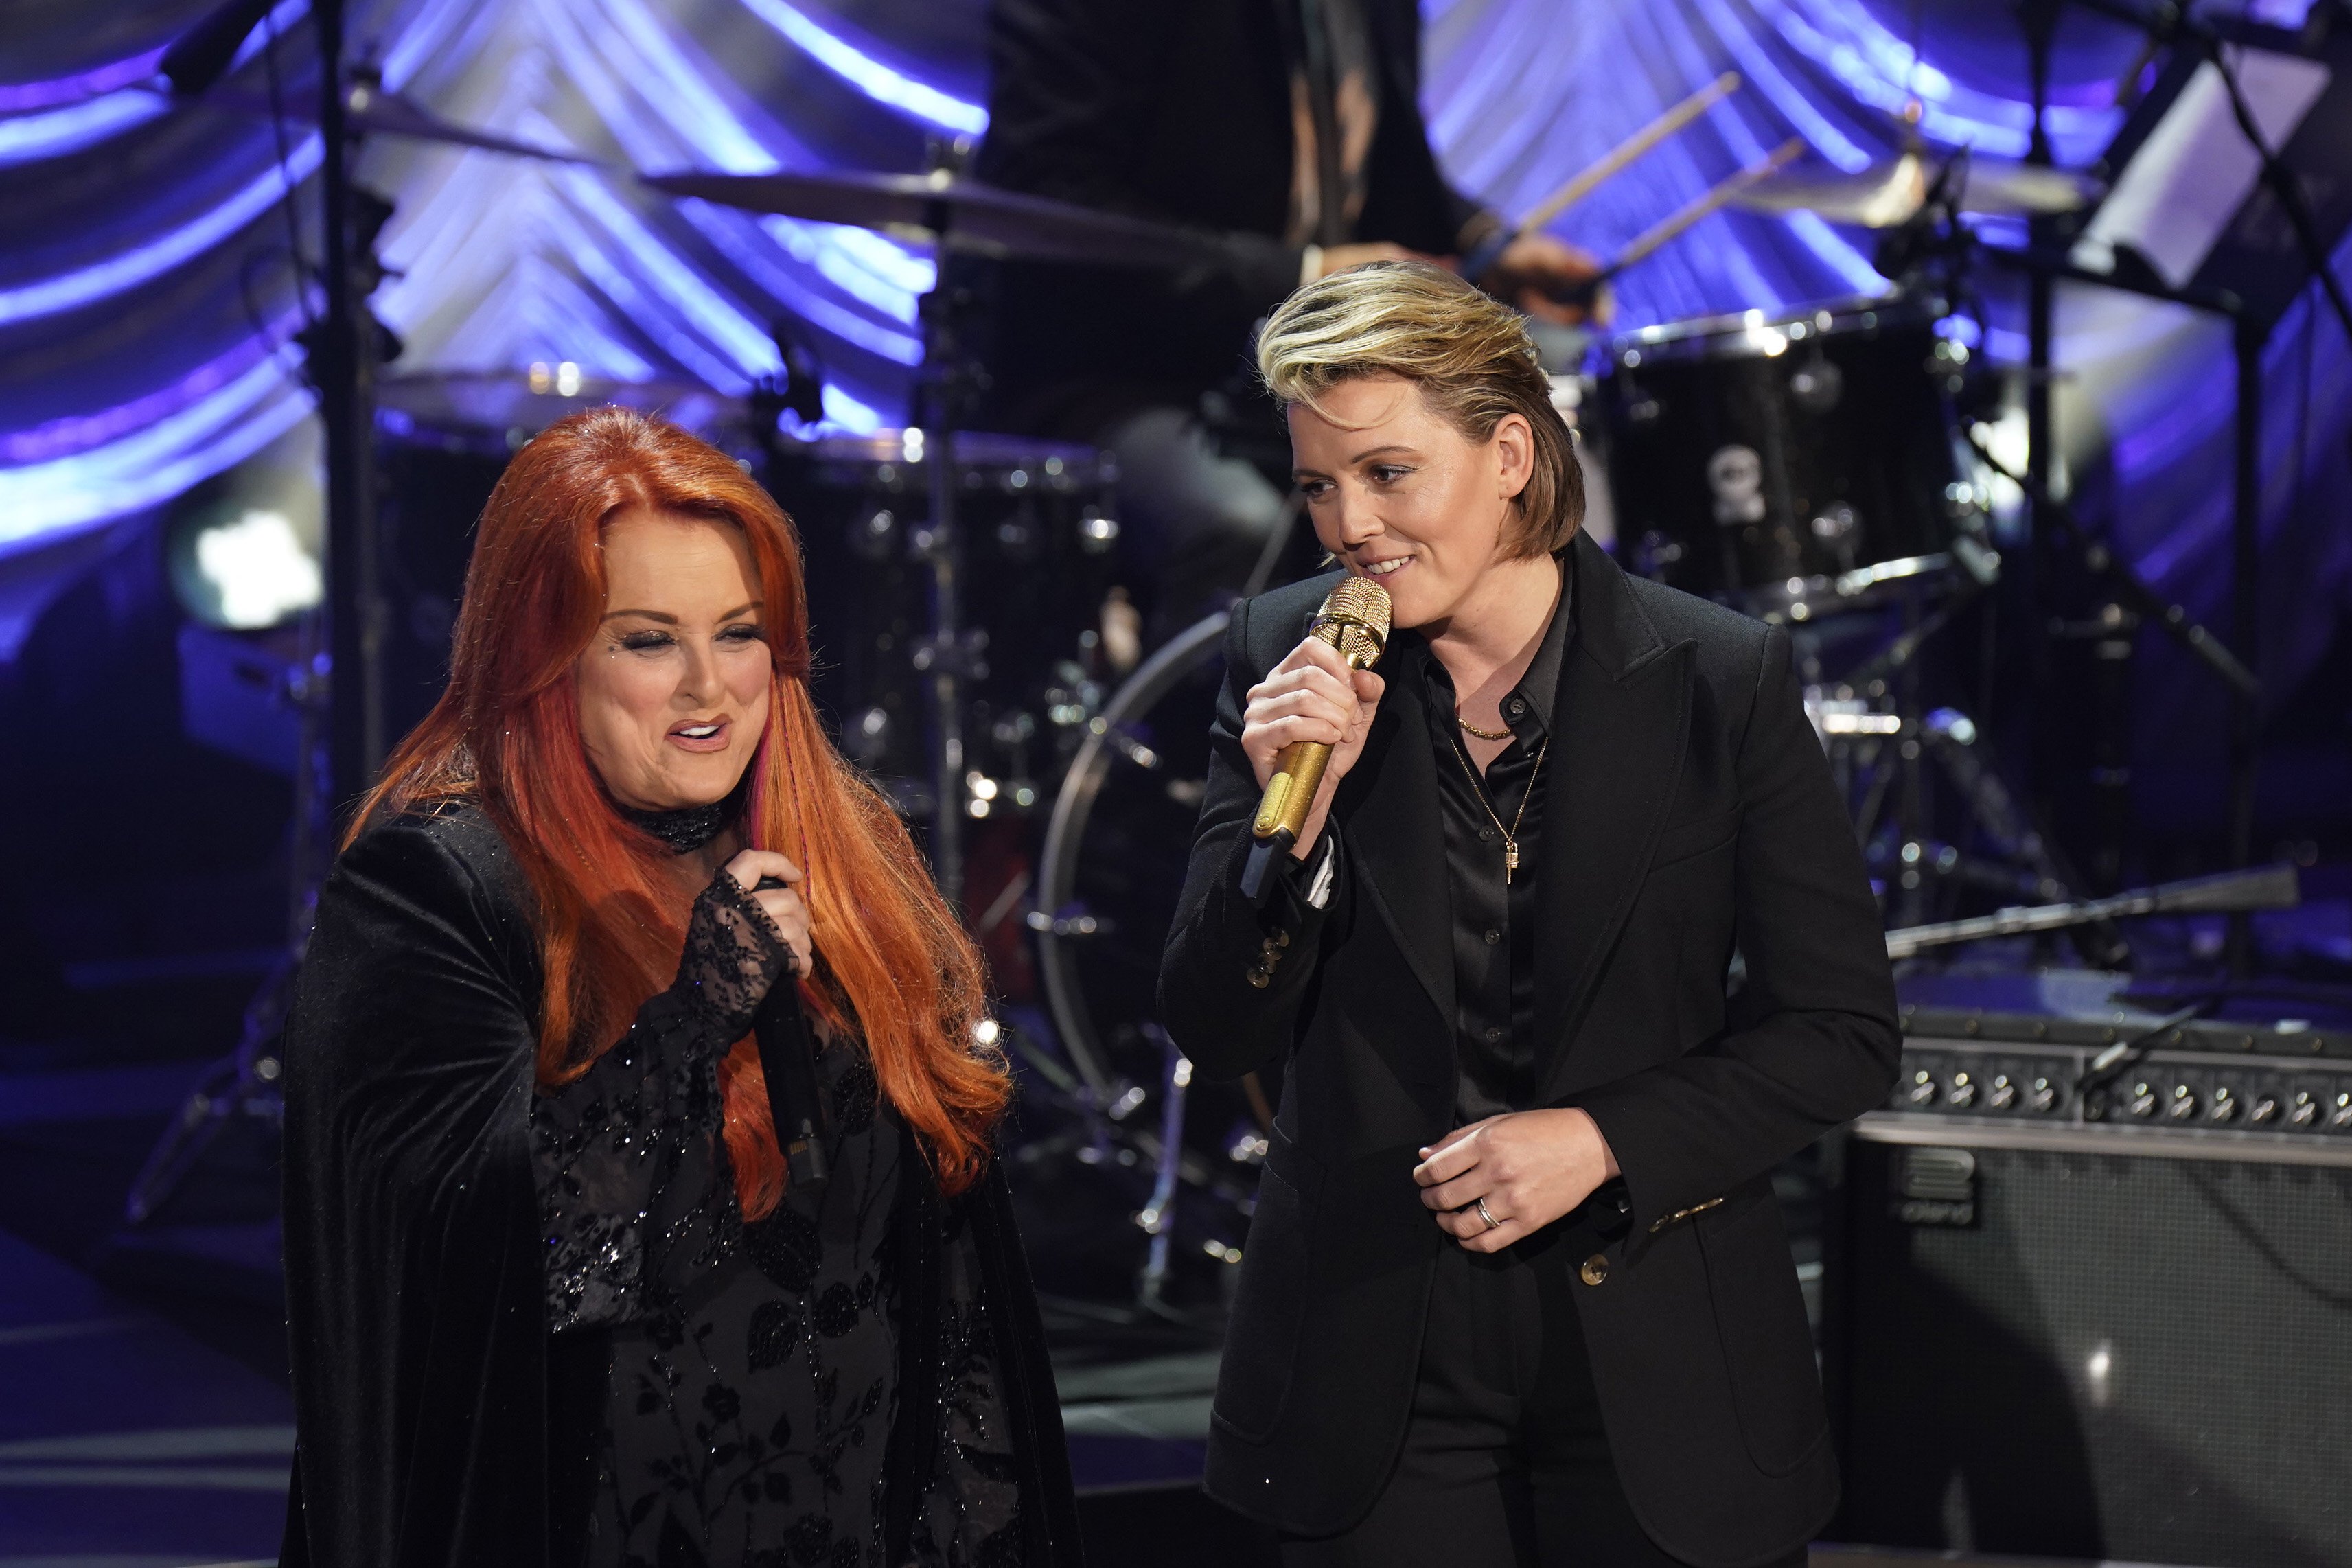 Wynonna Judd and Brandi Carlile perform onstage during the "Naomi Judd: 'A River Of Time'" Celebration on May 15, 2022, in Nashville, Tennessee. | Source: Mickey Bernal/Getty Images